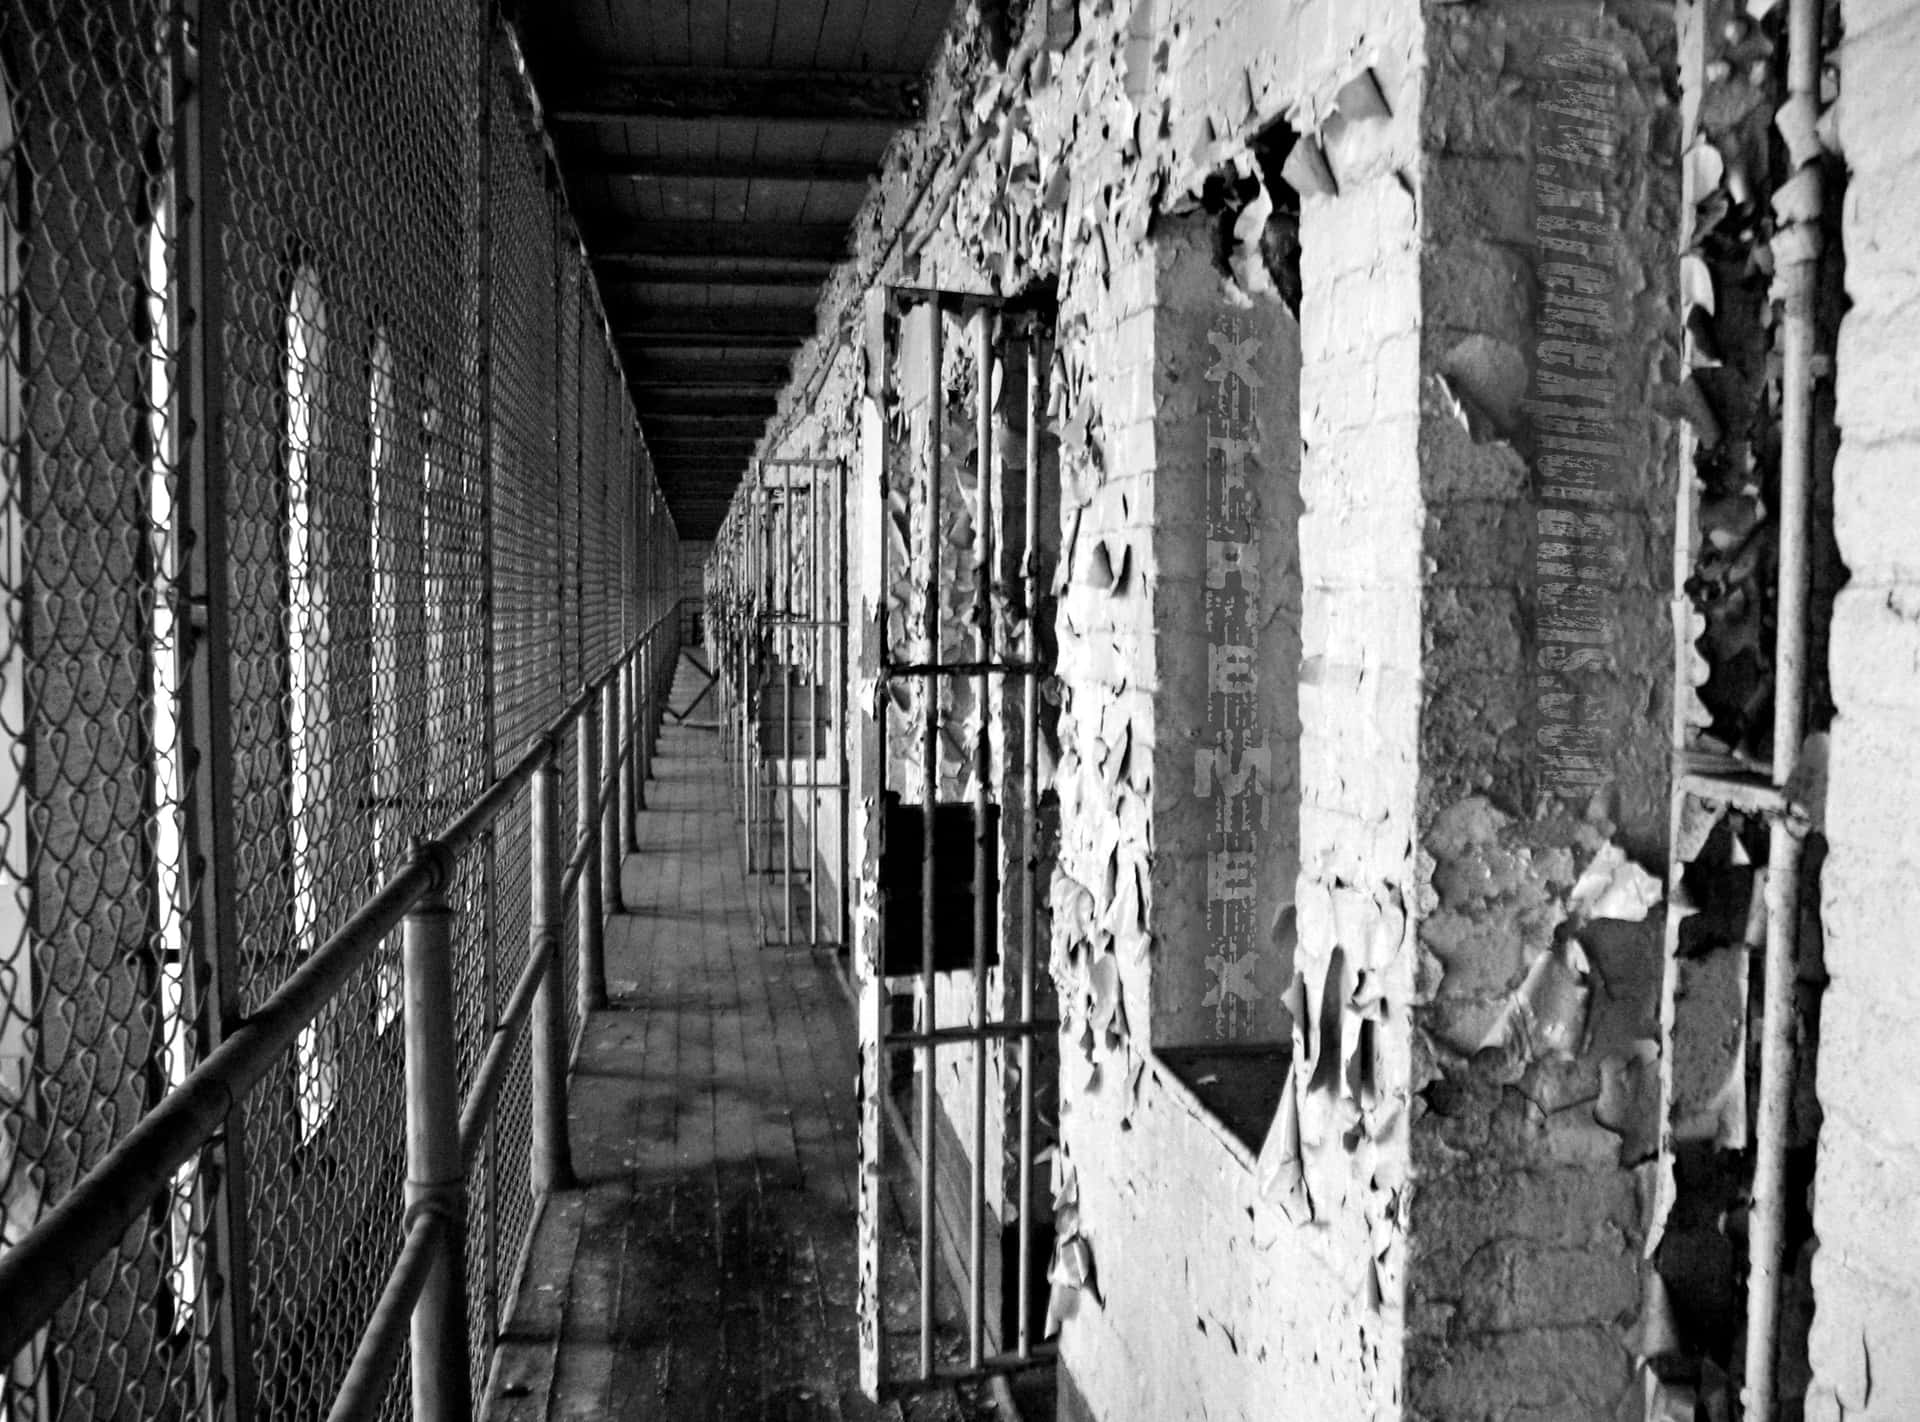 A Black And White Photo Of An Old Prison Cell